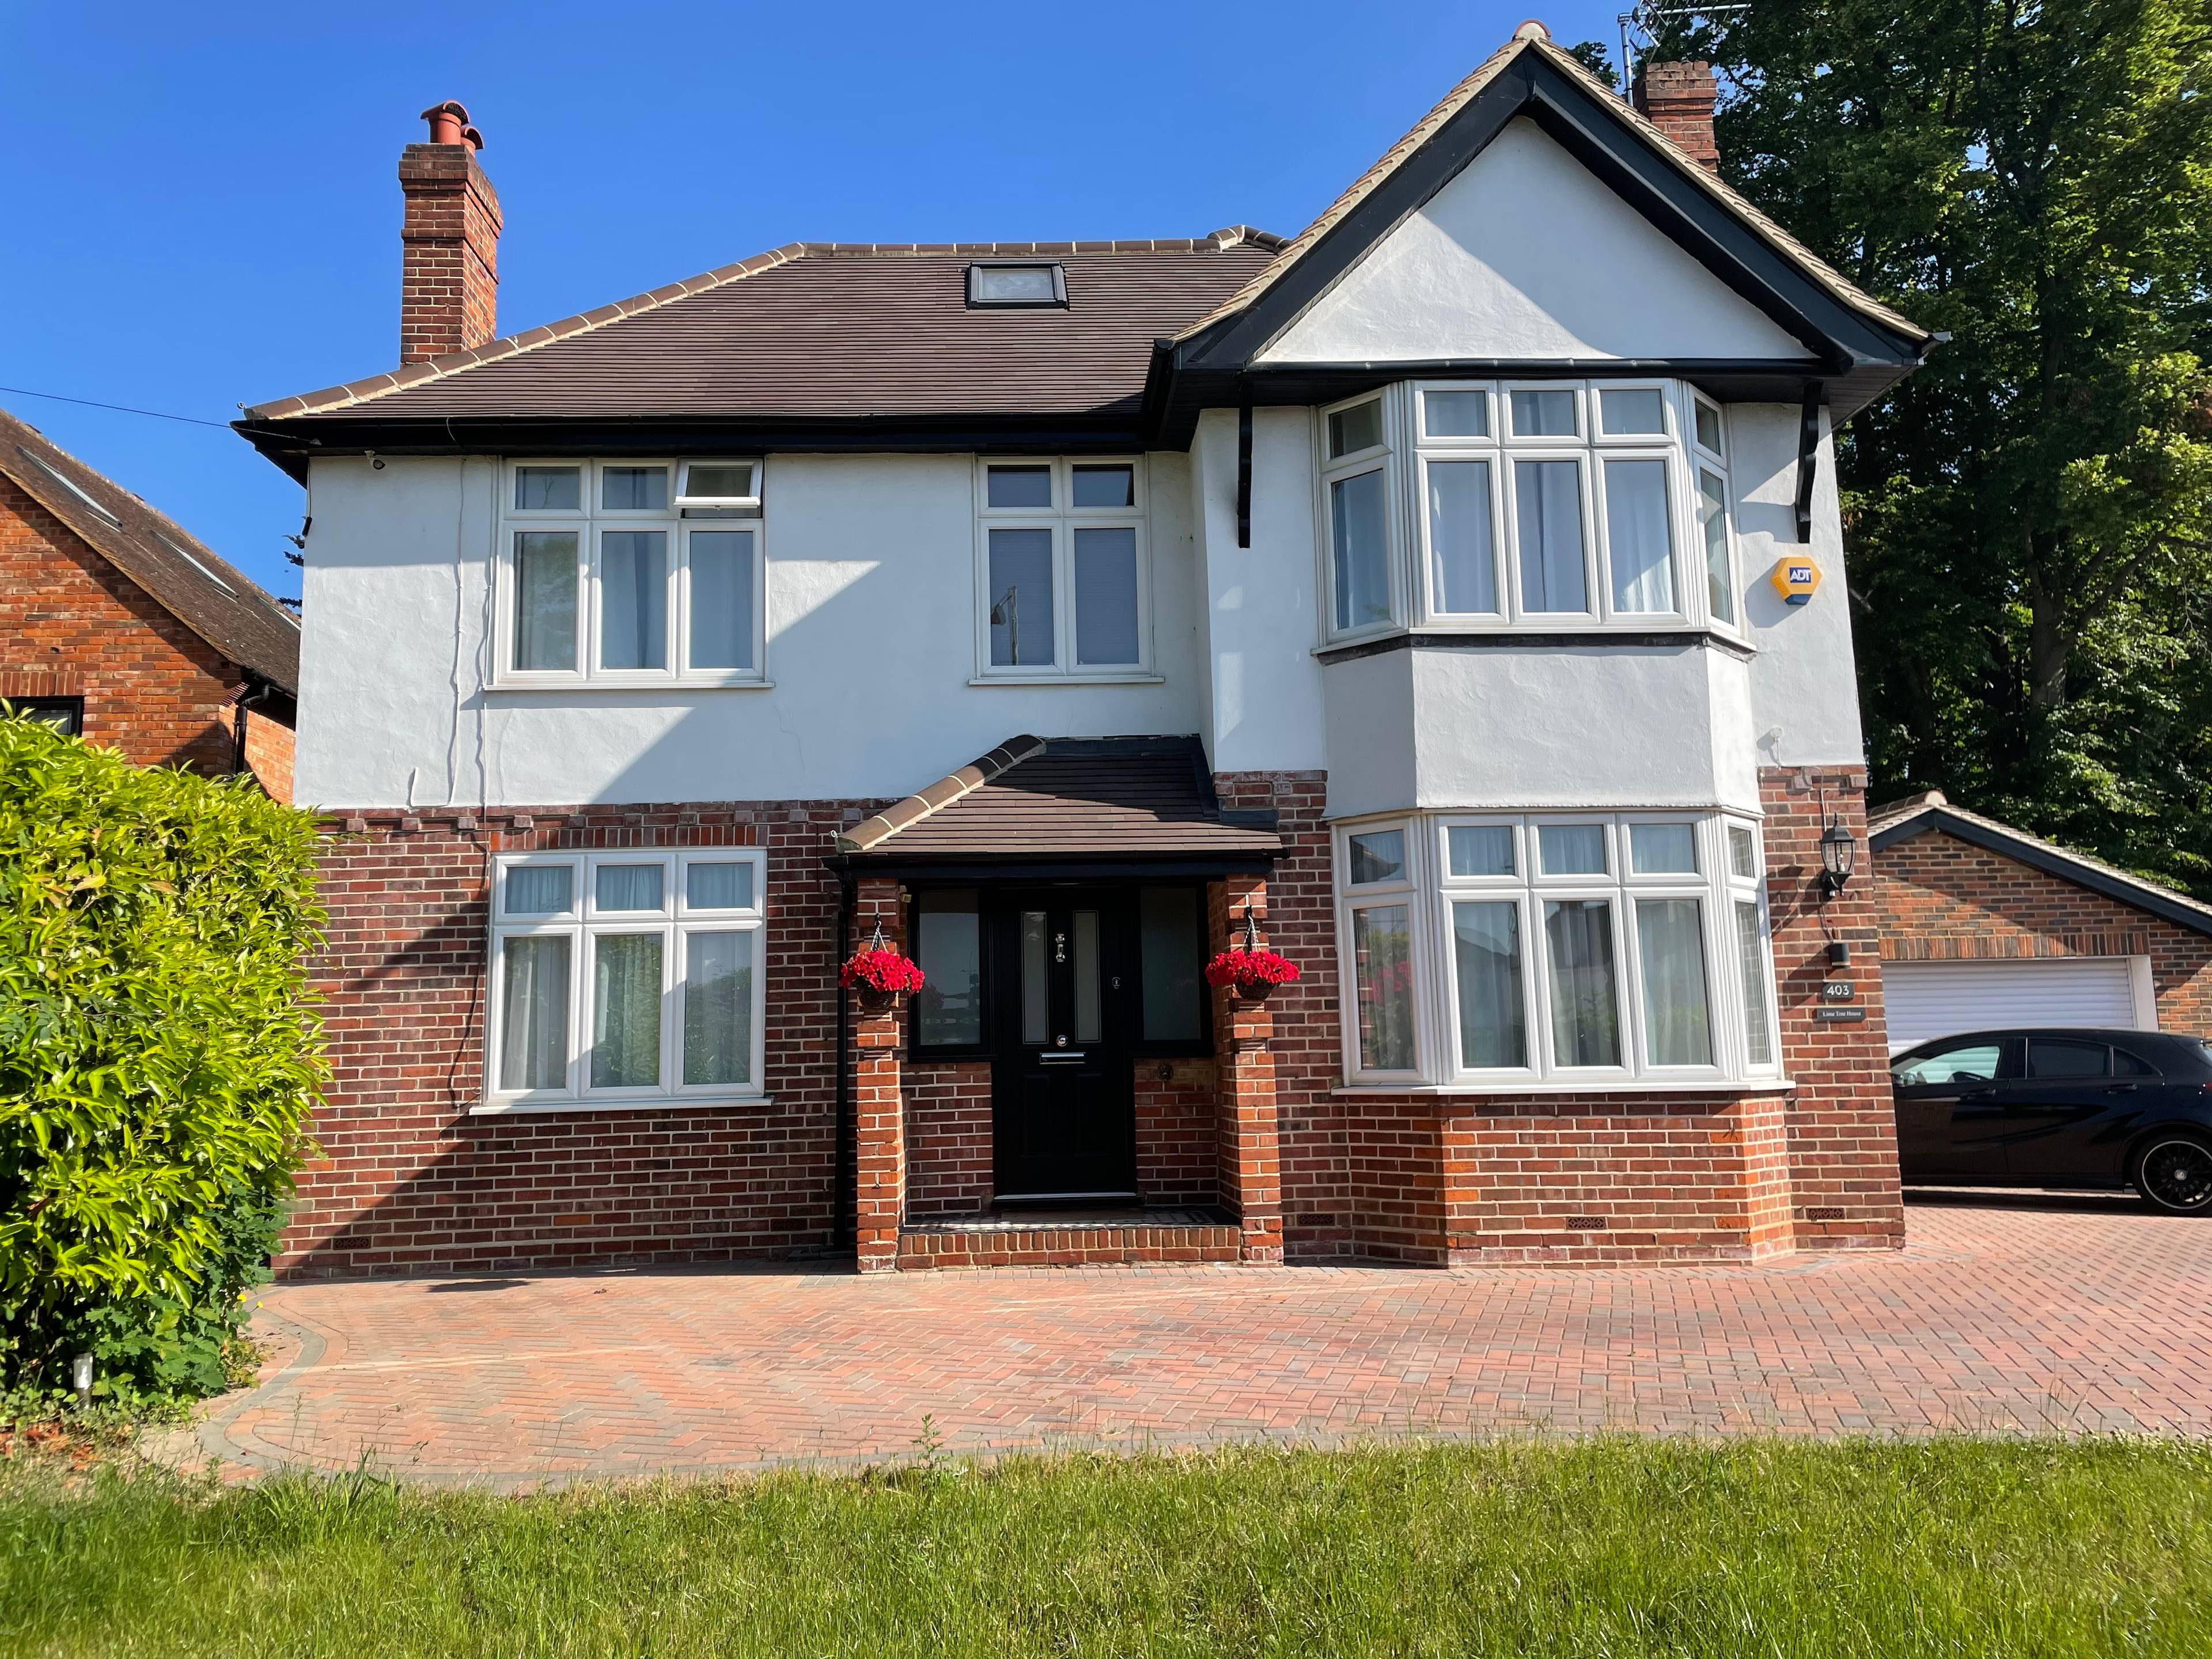 Stunning 5 bedroom detached house spanning over 2842 square feet- located close to Earley train station and the M4 - great for commuters